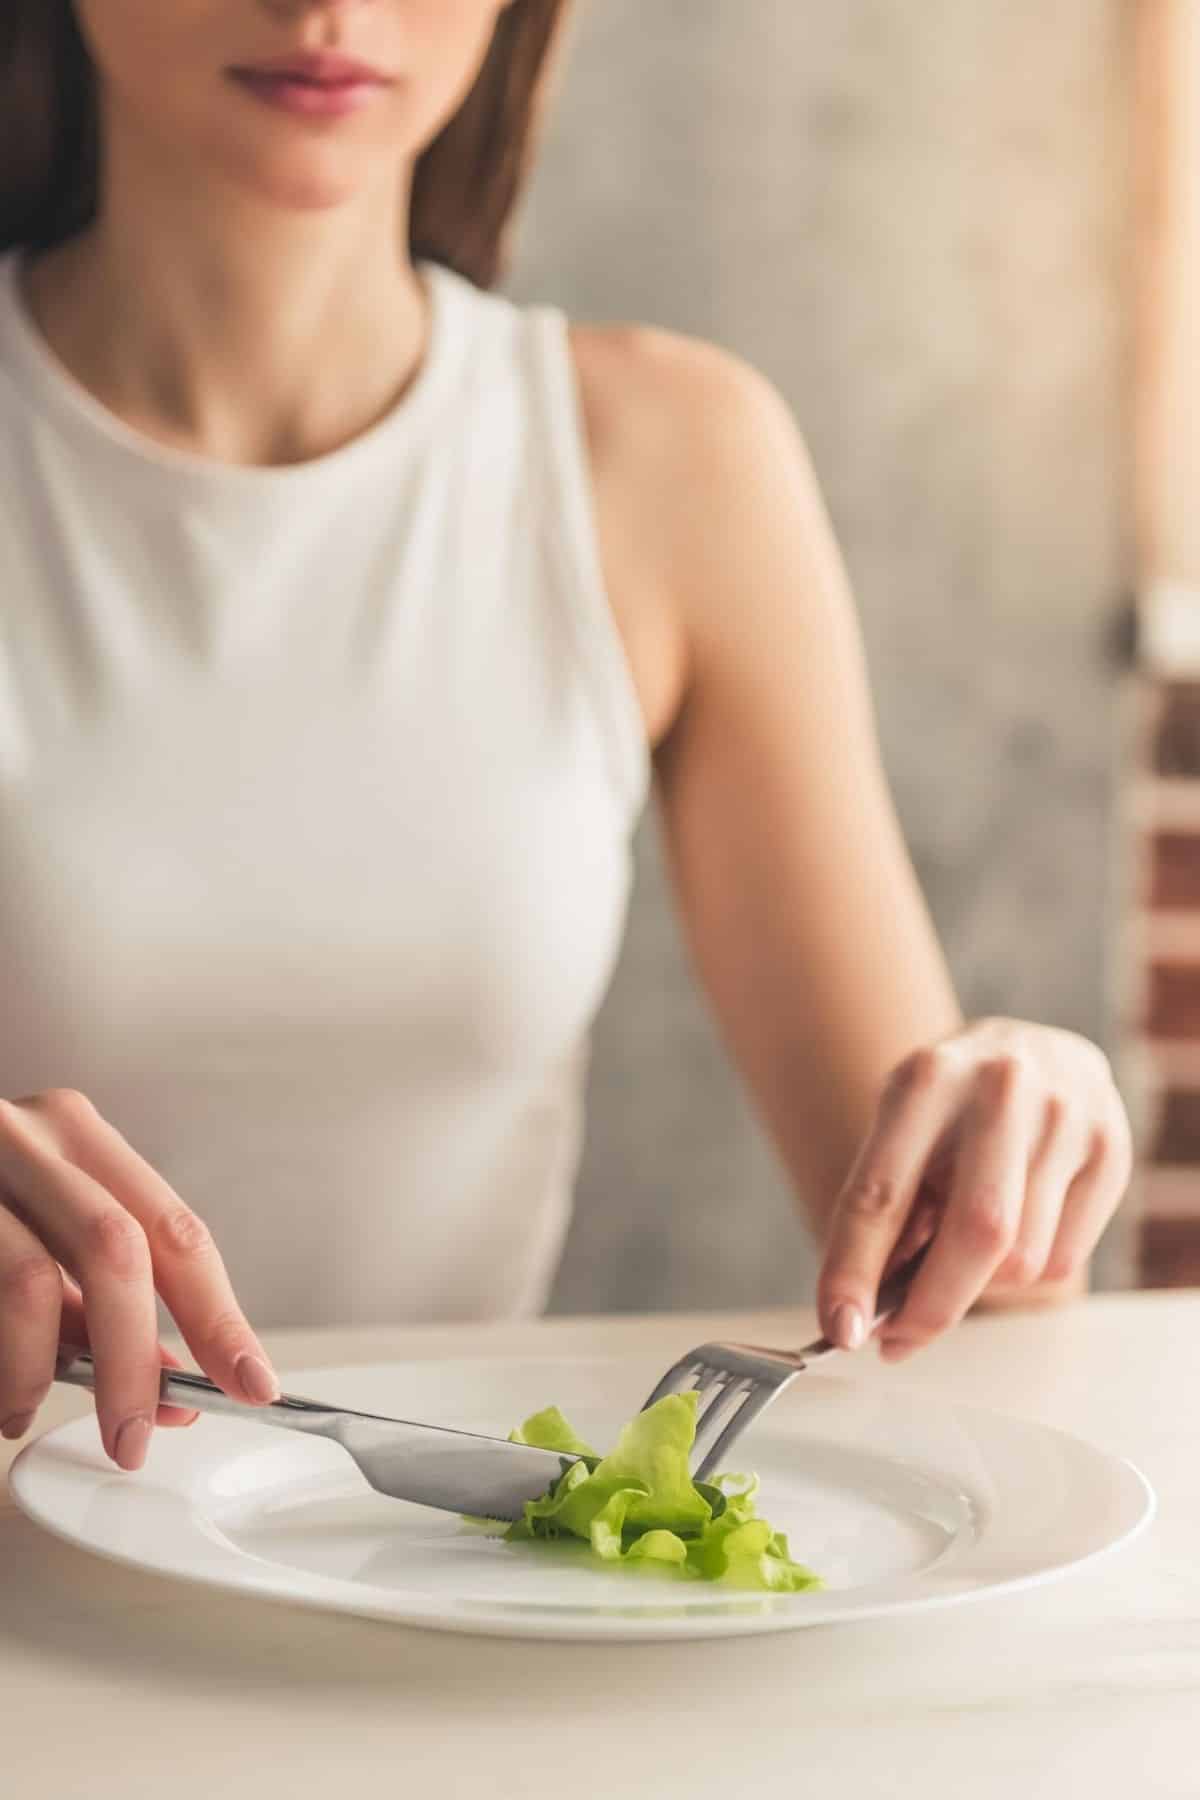 woman with eating disorder cutting a piece of lettuce.